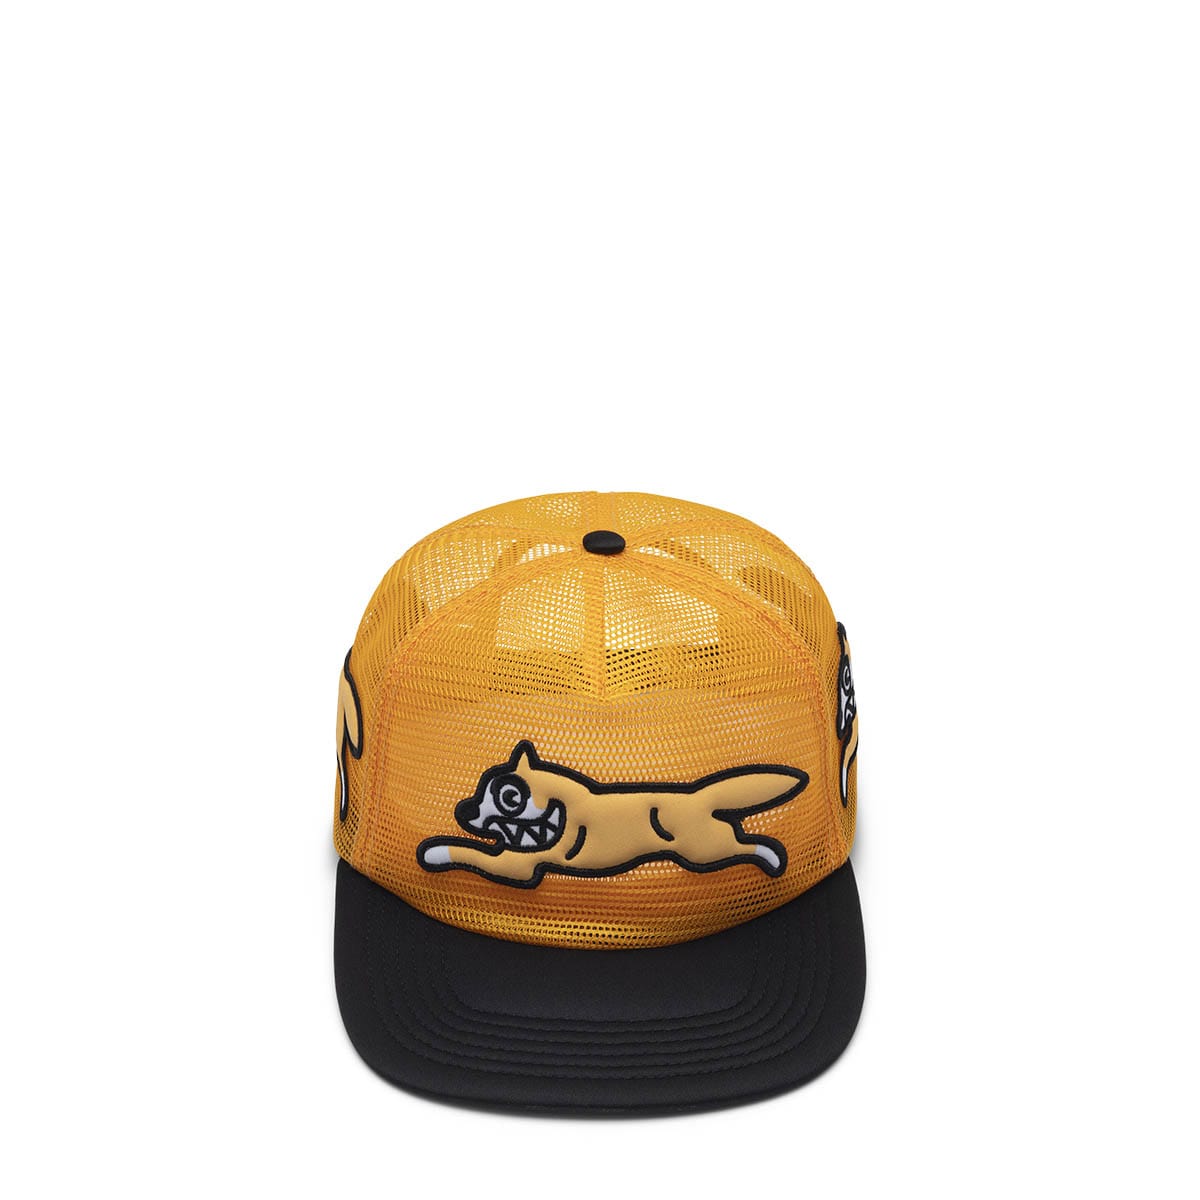 ICECREAM Accessories - HATS - Snapback-Fitted Hat BLACK / O/S MESH TRUCKER HAT